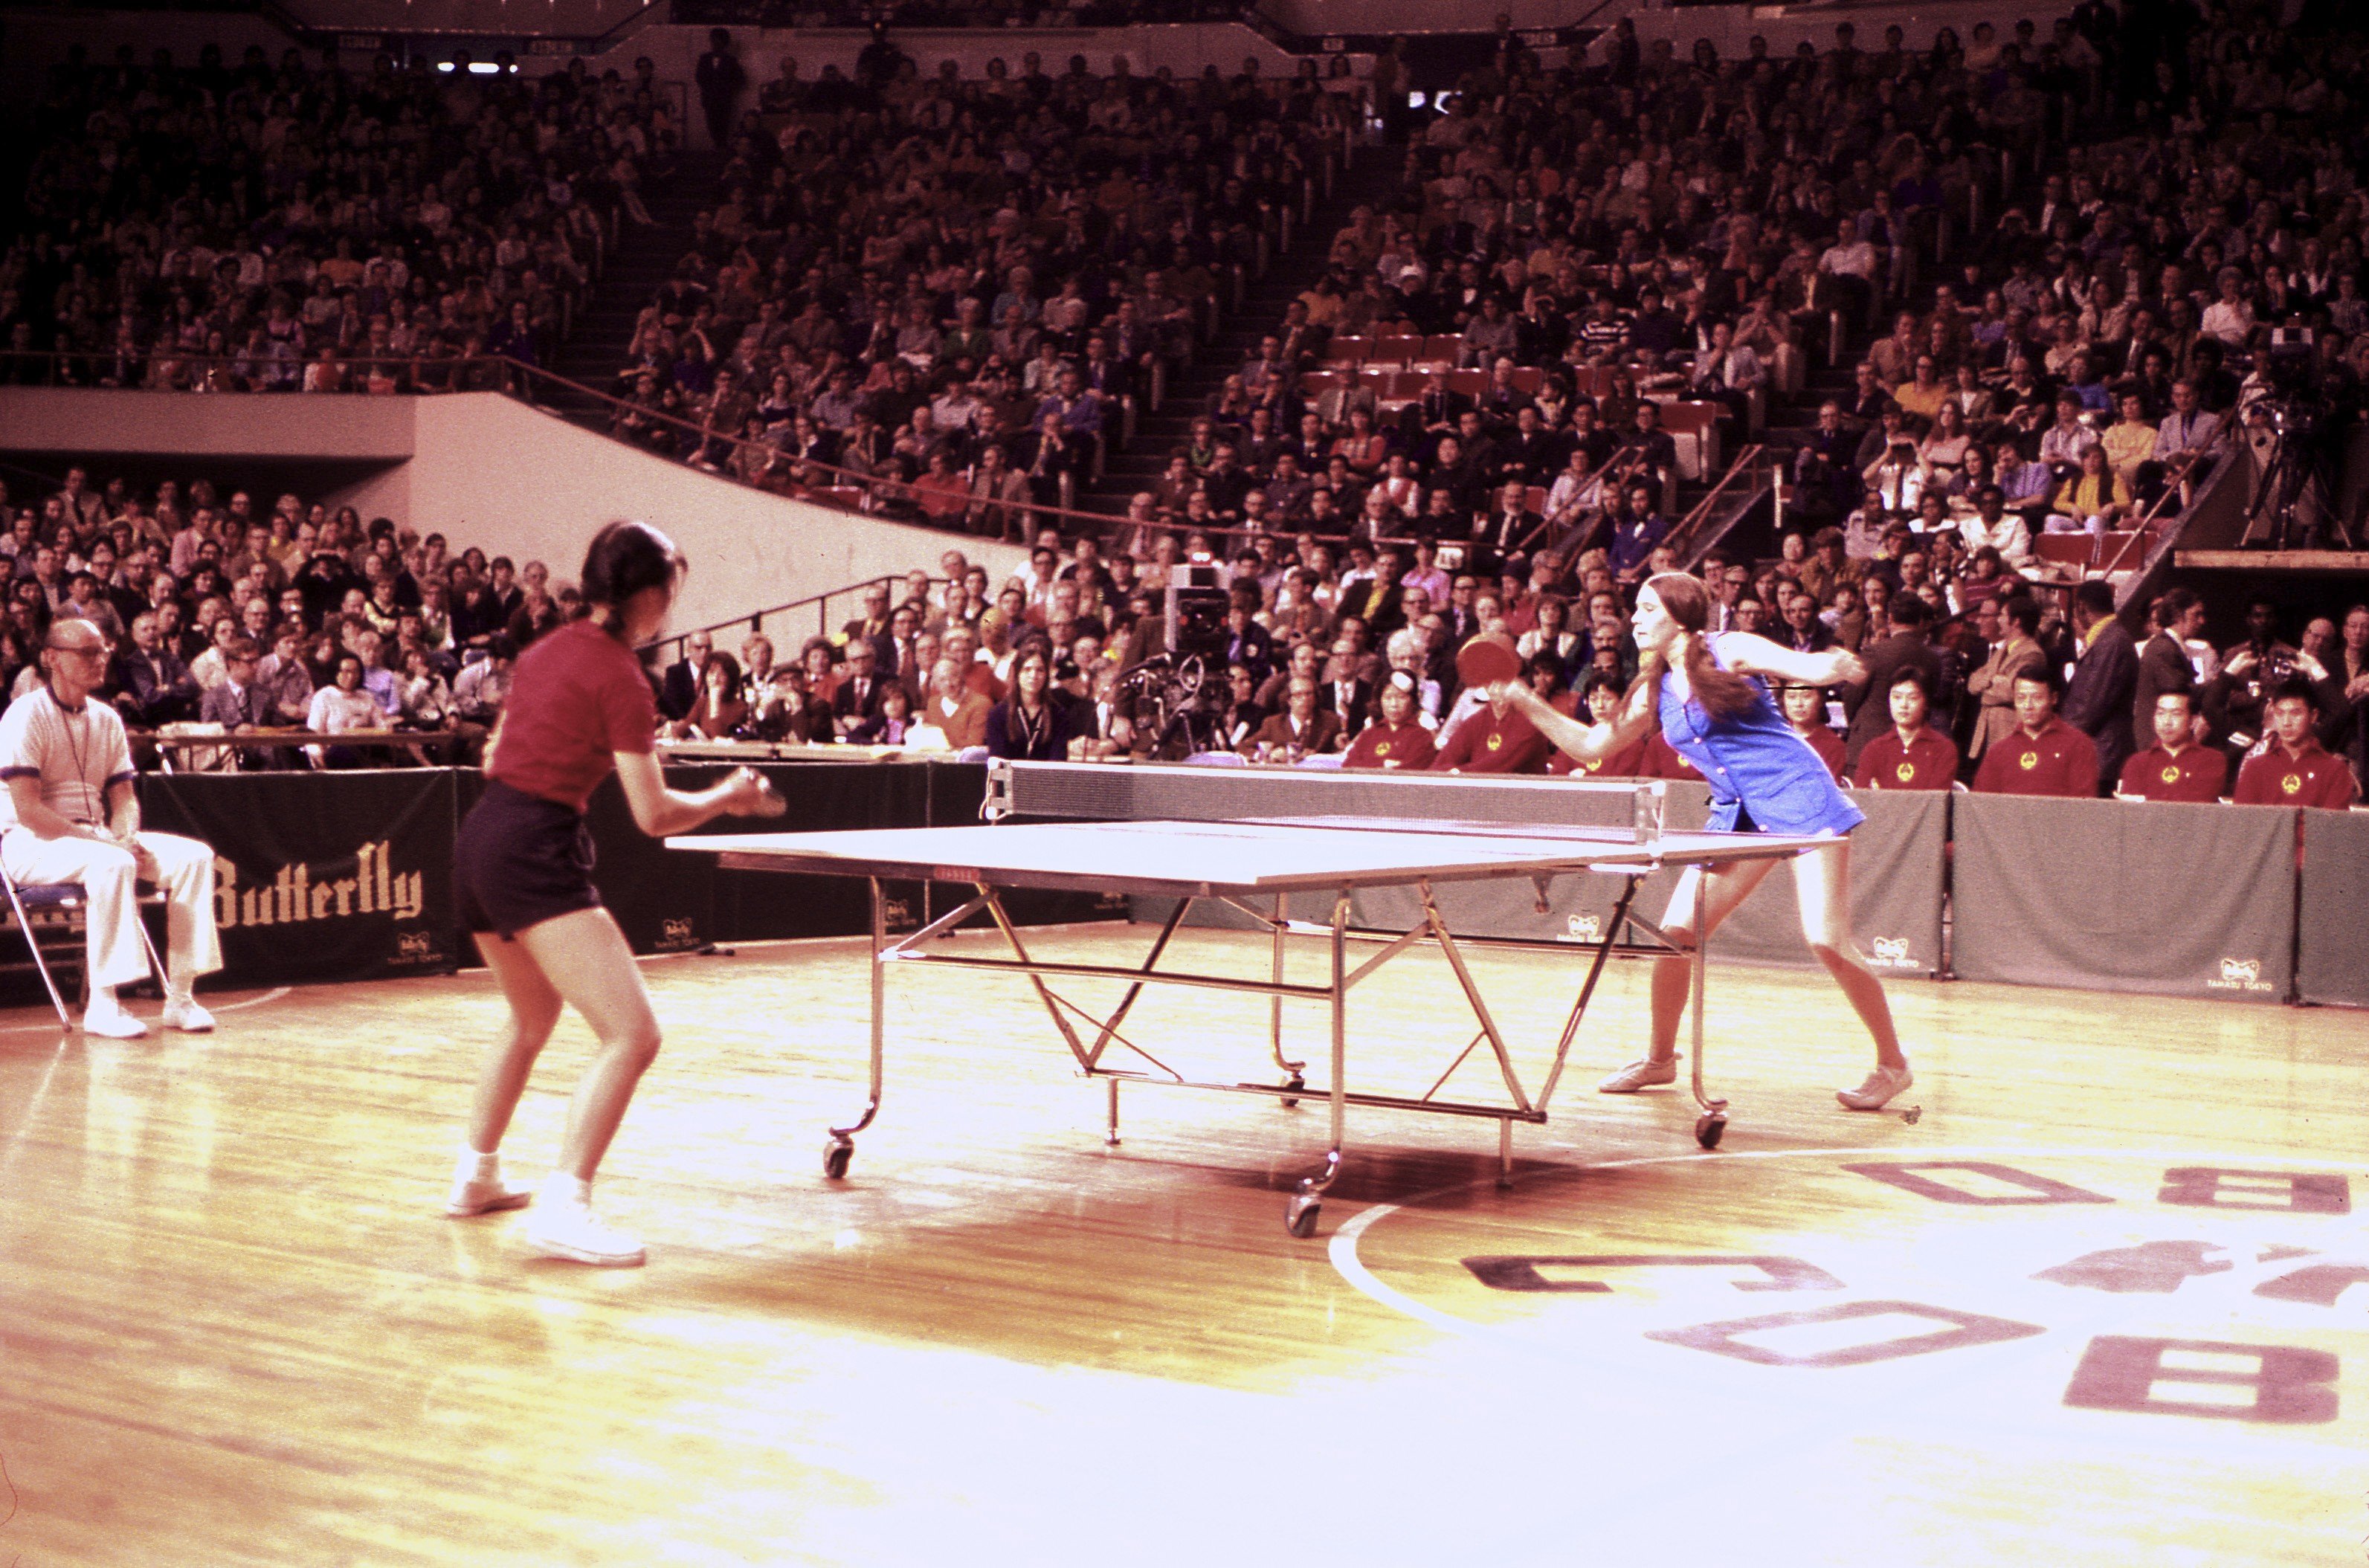 American Judy Bochenski plays a match against a member of the visiting Chinese table tennis team, in Cobo Hall, Detroit, in 1972. Photo: courtesy of Judy Hoarfrost